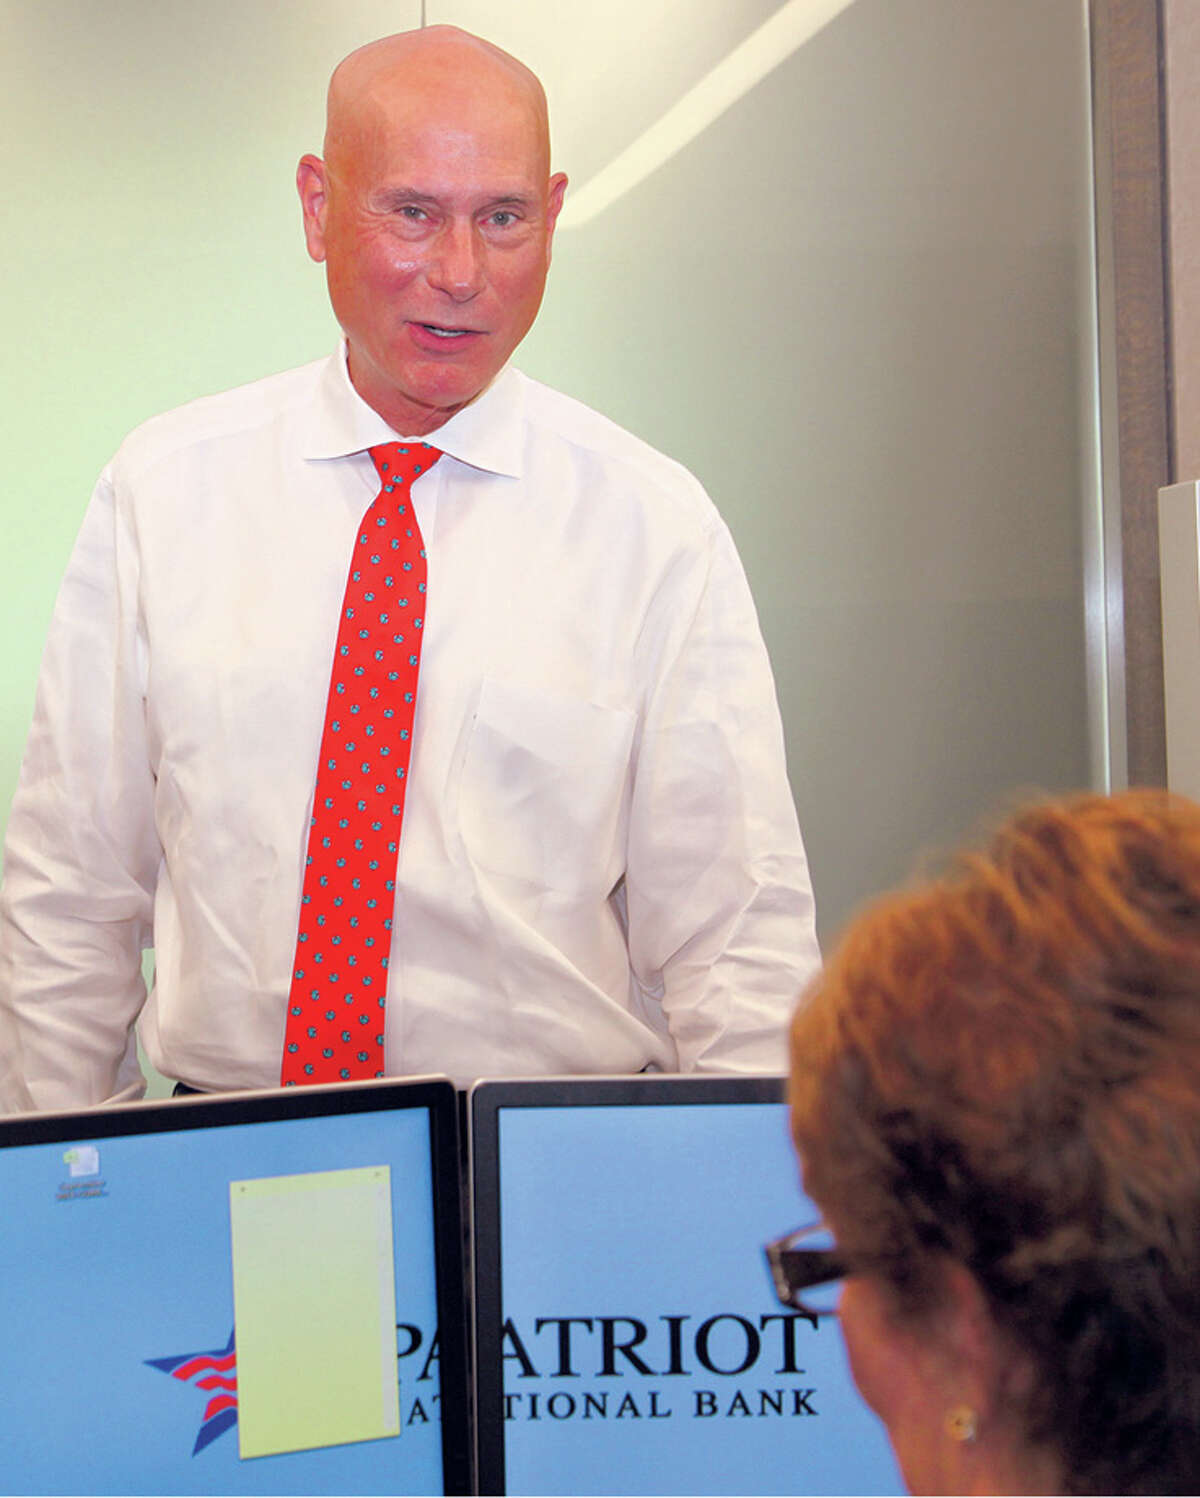 Patriot National Bank CEO Ken Neilson talks with an employee in his Stamford office.